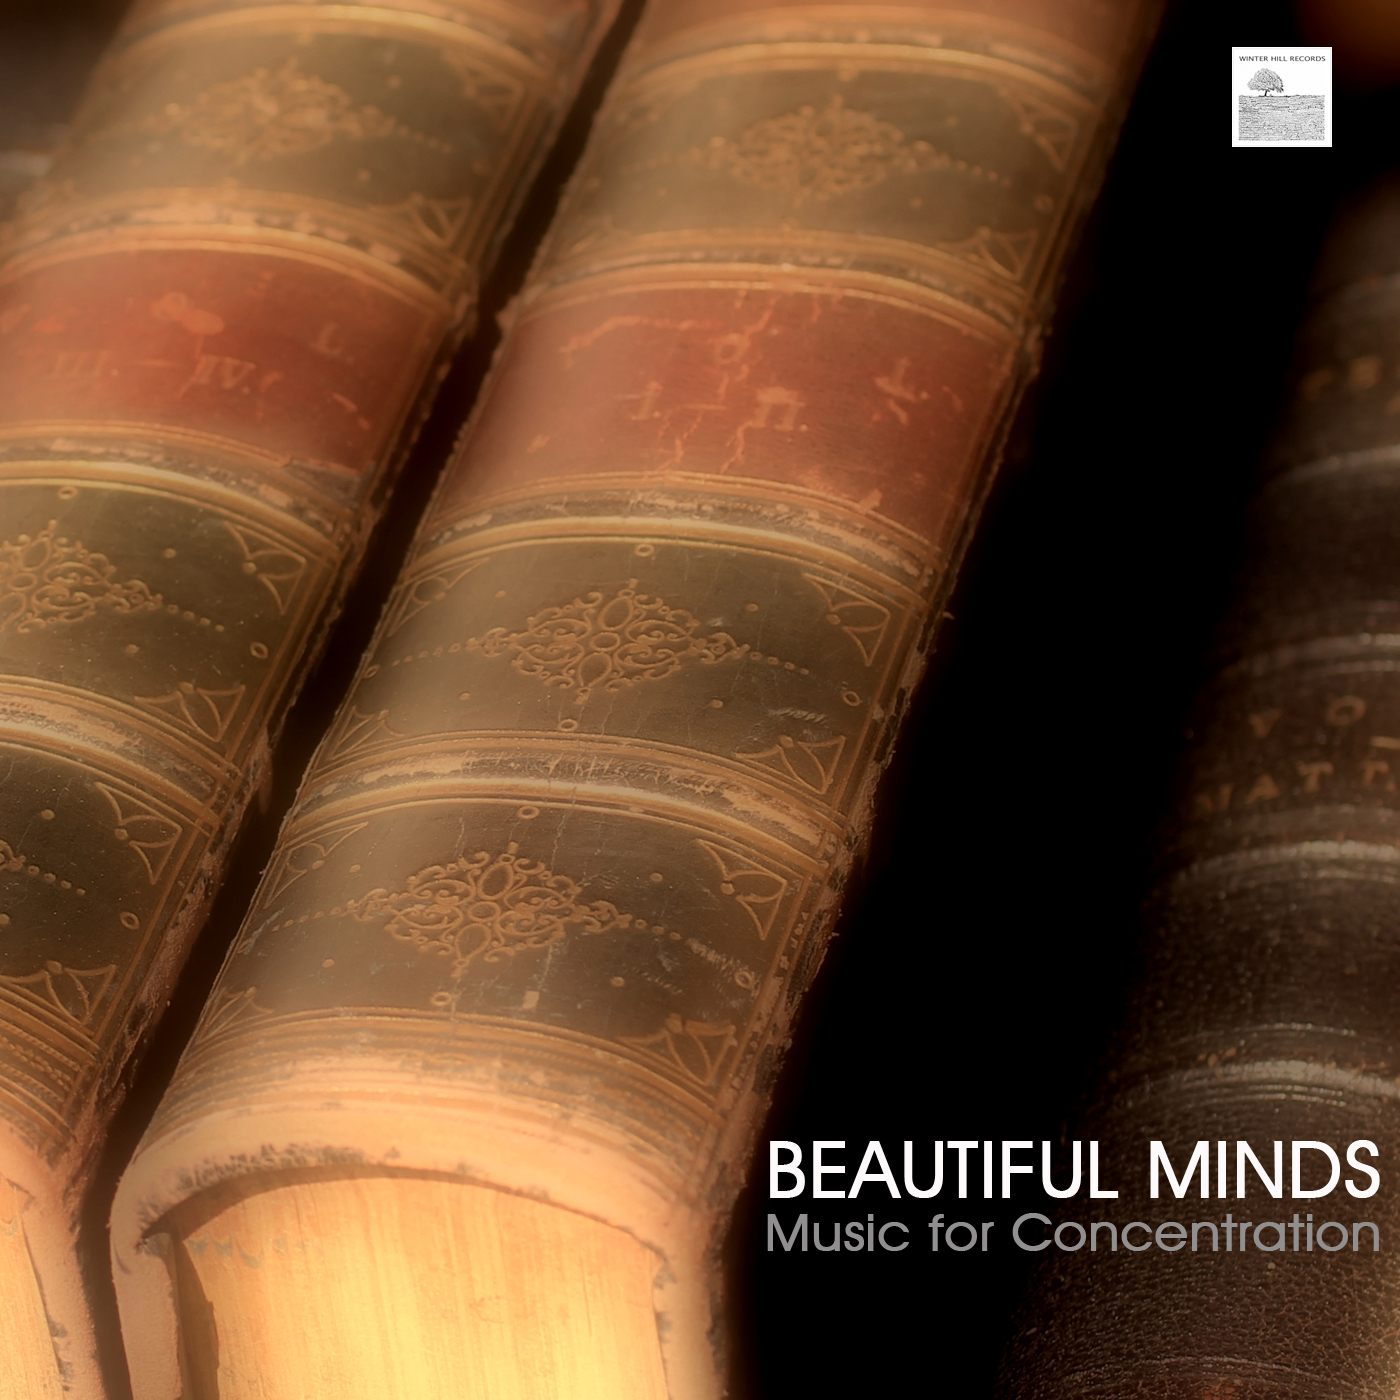 How to Have a Beautiful Mind - Music to Study